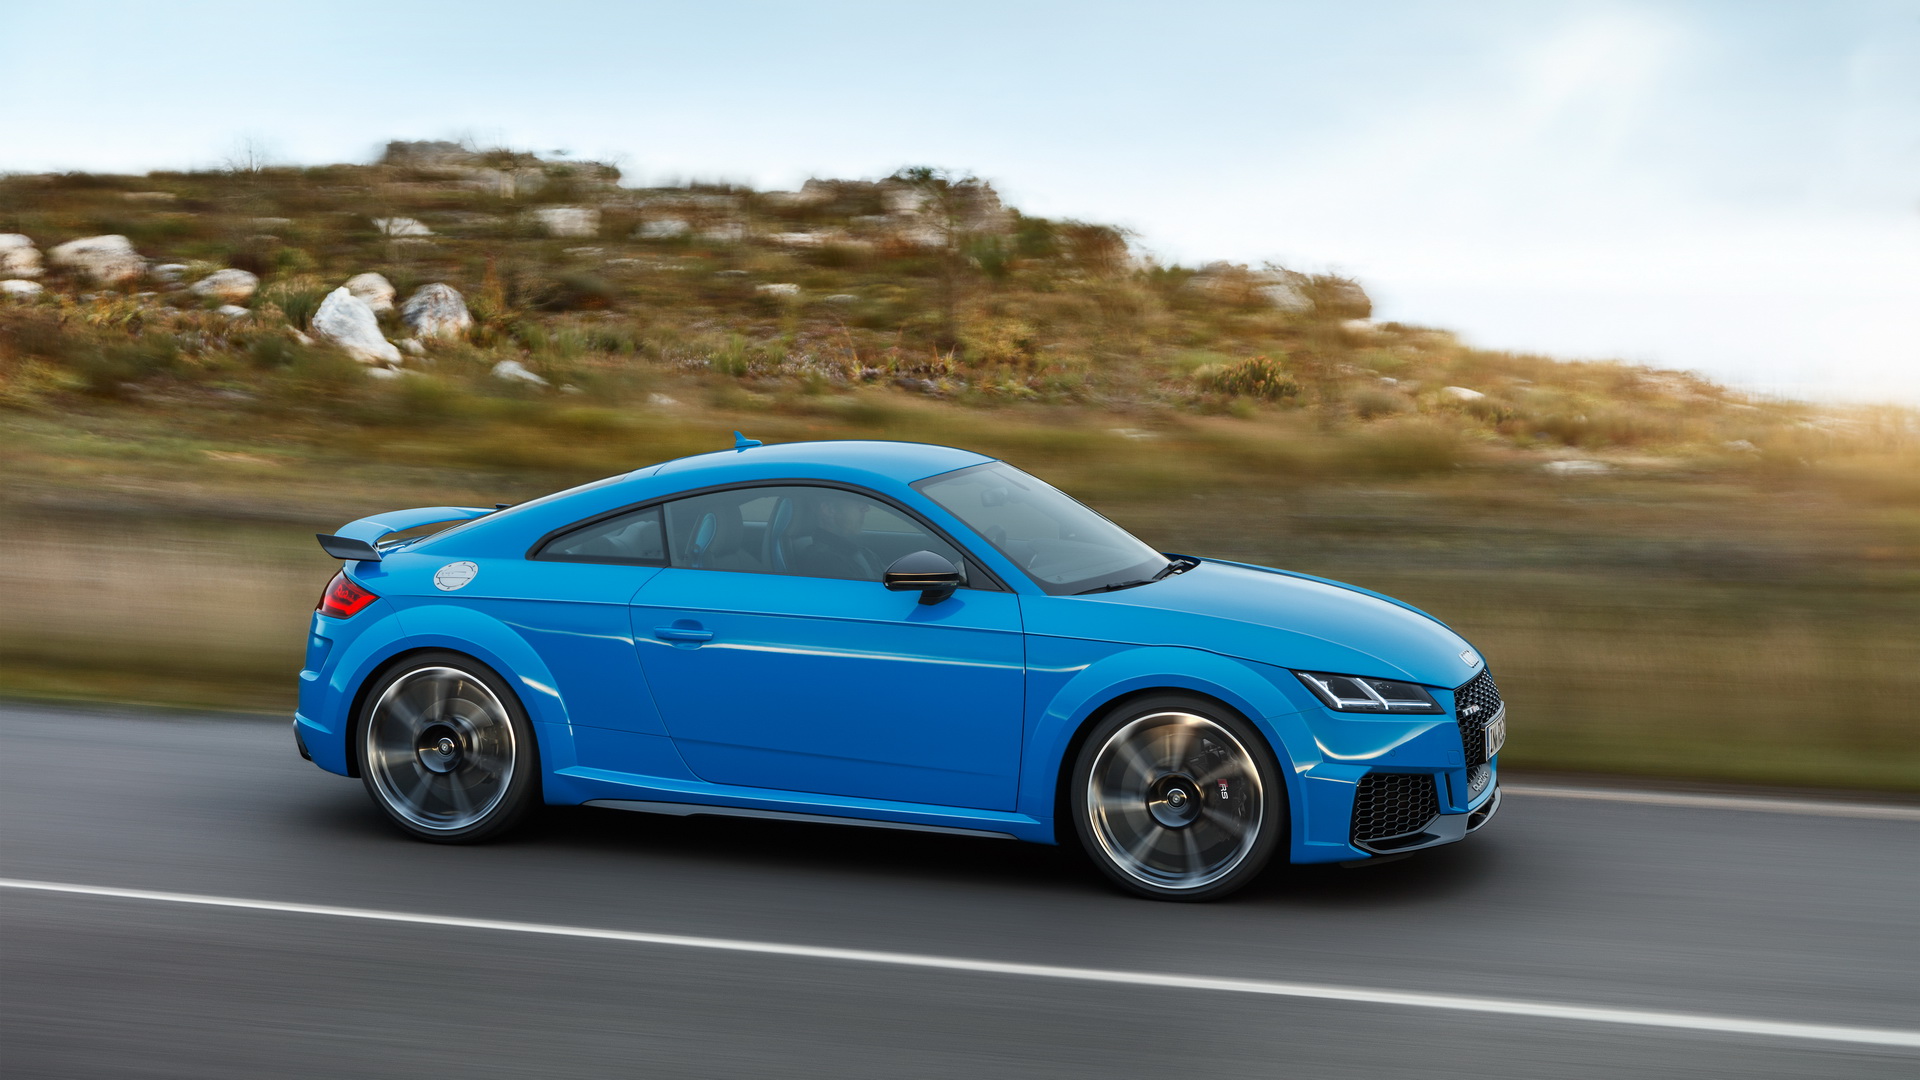 Facelifted 2019 Audi TT RS Arrives In The U.S. Priced From $67,895 |  Carscoops